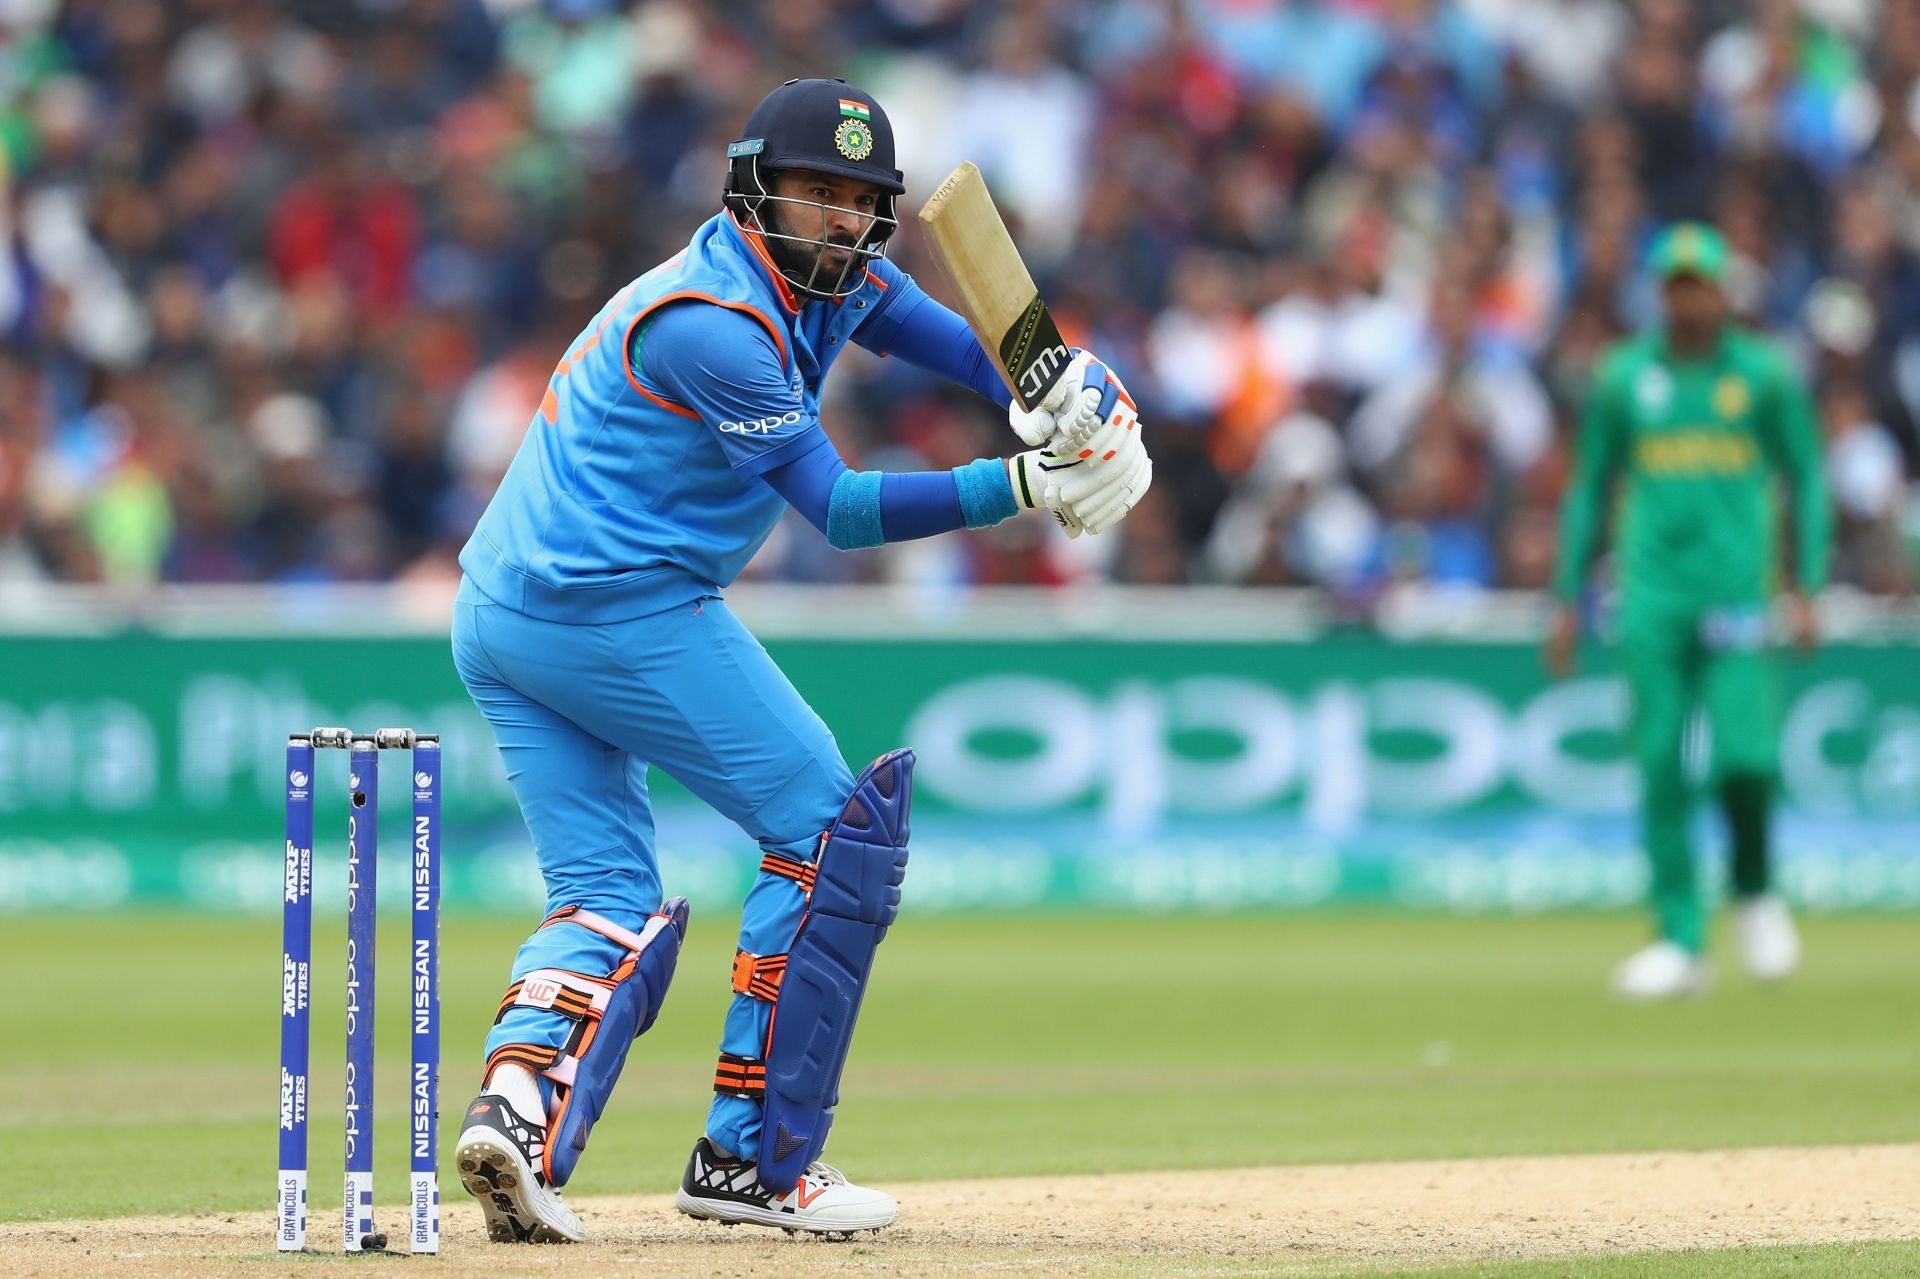 Yuvraj Singh during the Champions Trophy match against Pakistan in Birmingham. (Pic: Getty Images)